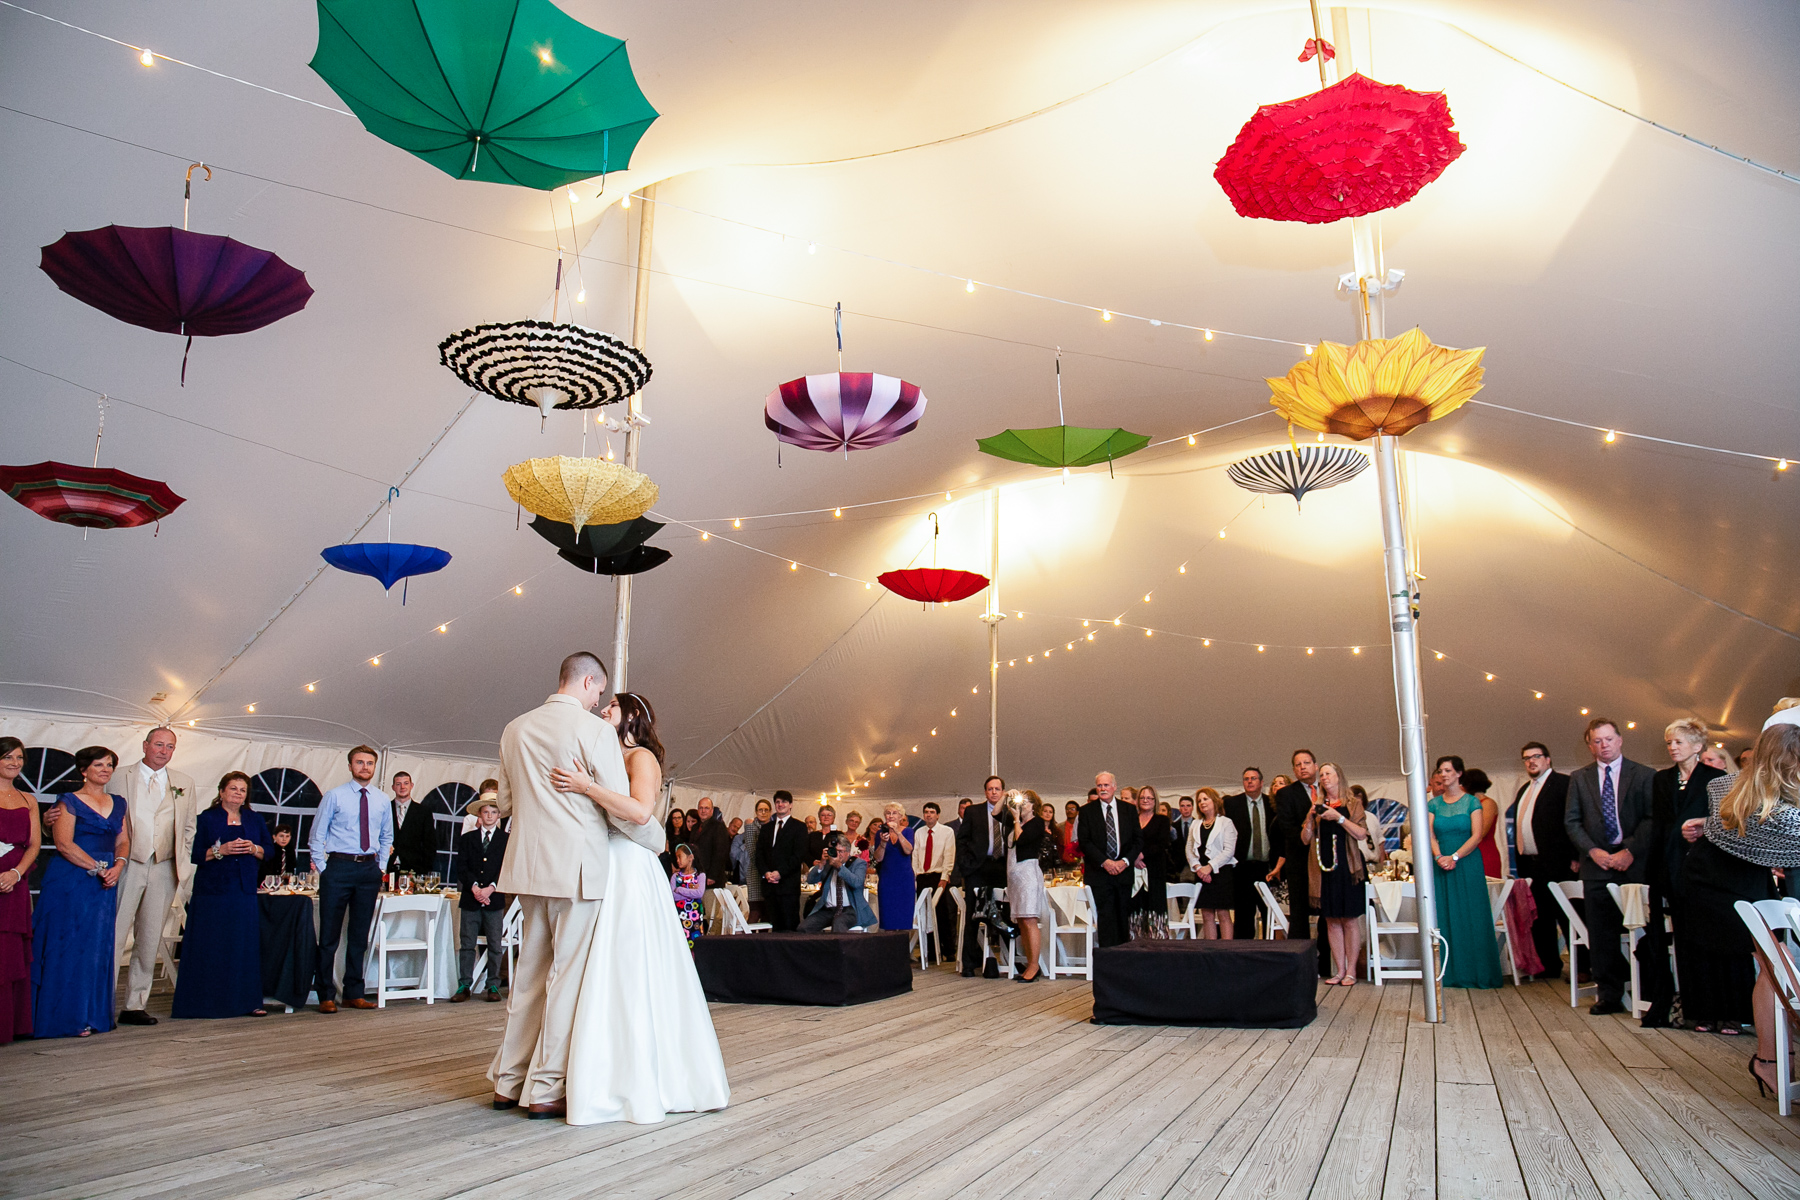 The bride and groom enjoying their first dance together in the tent, surrounded by loved ones